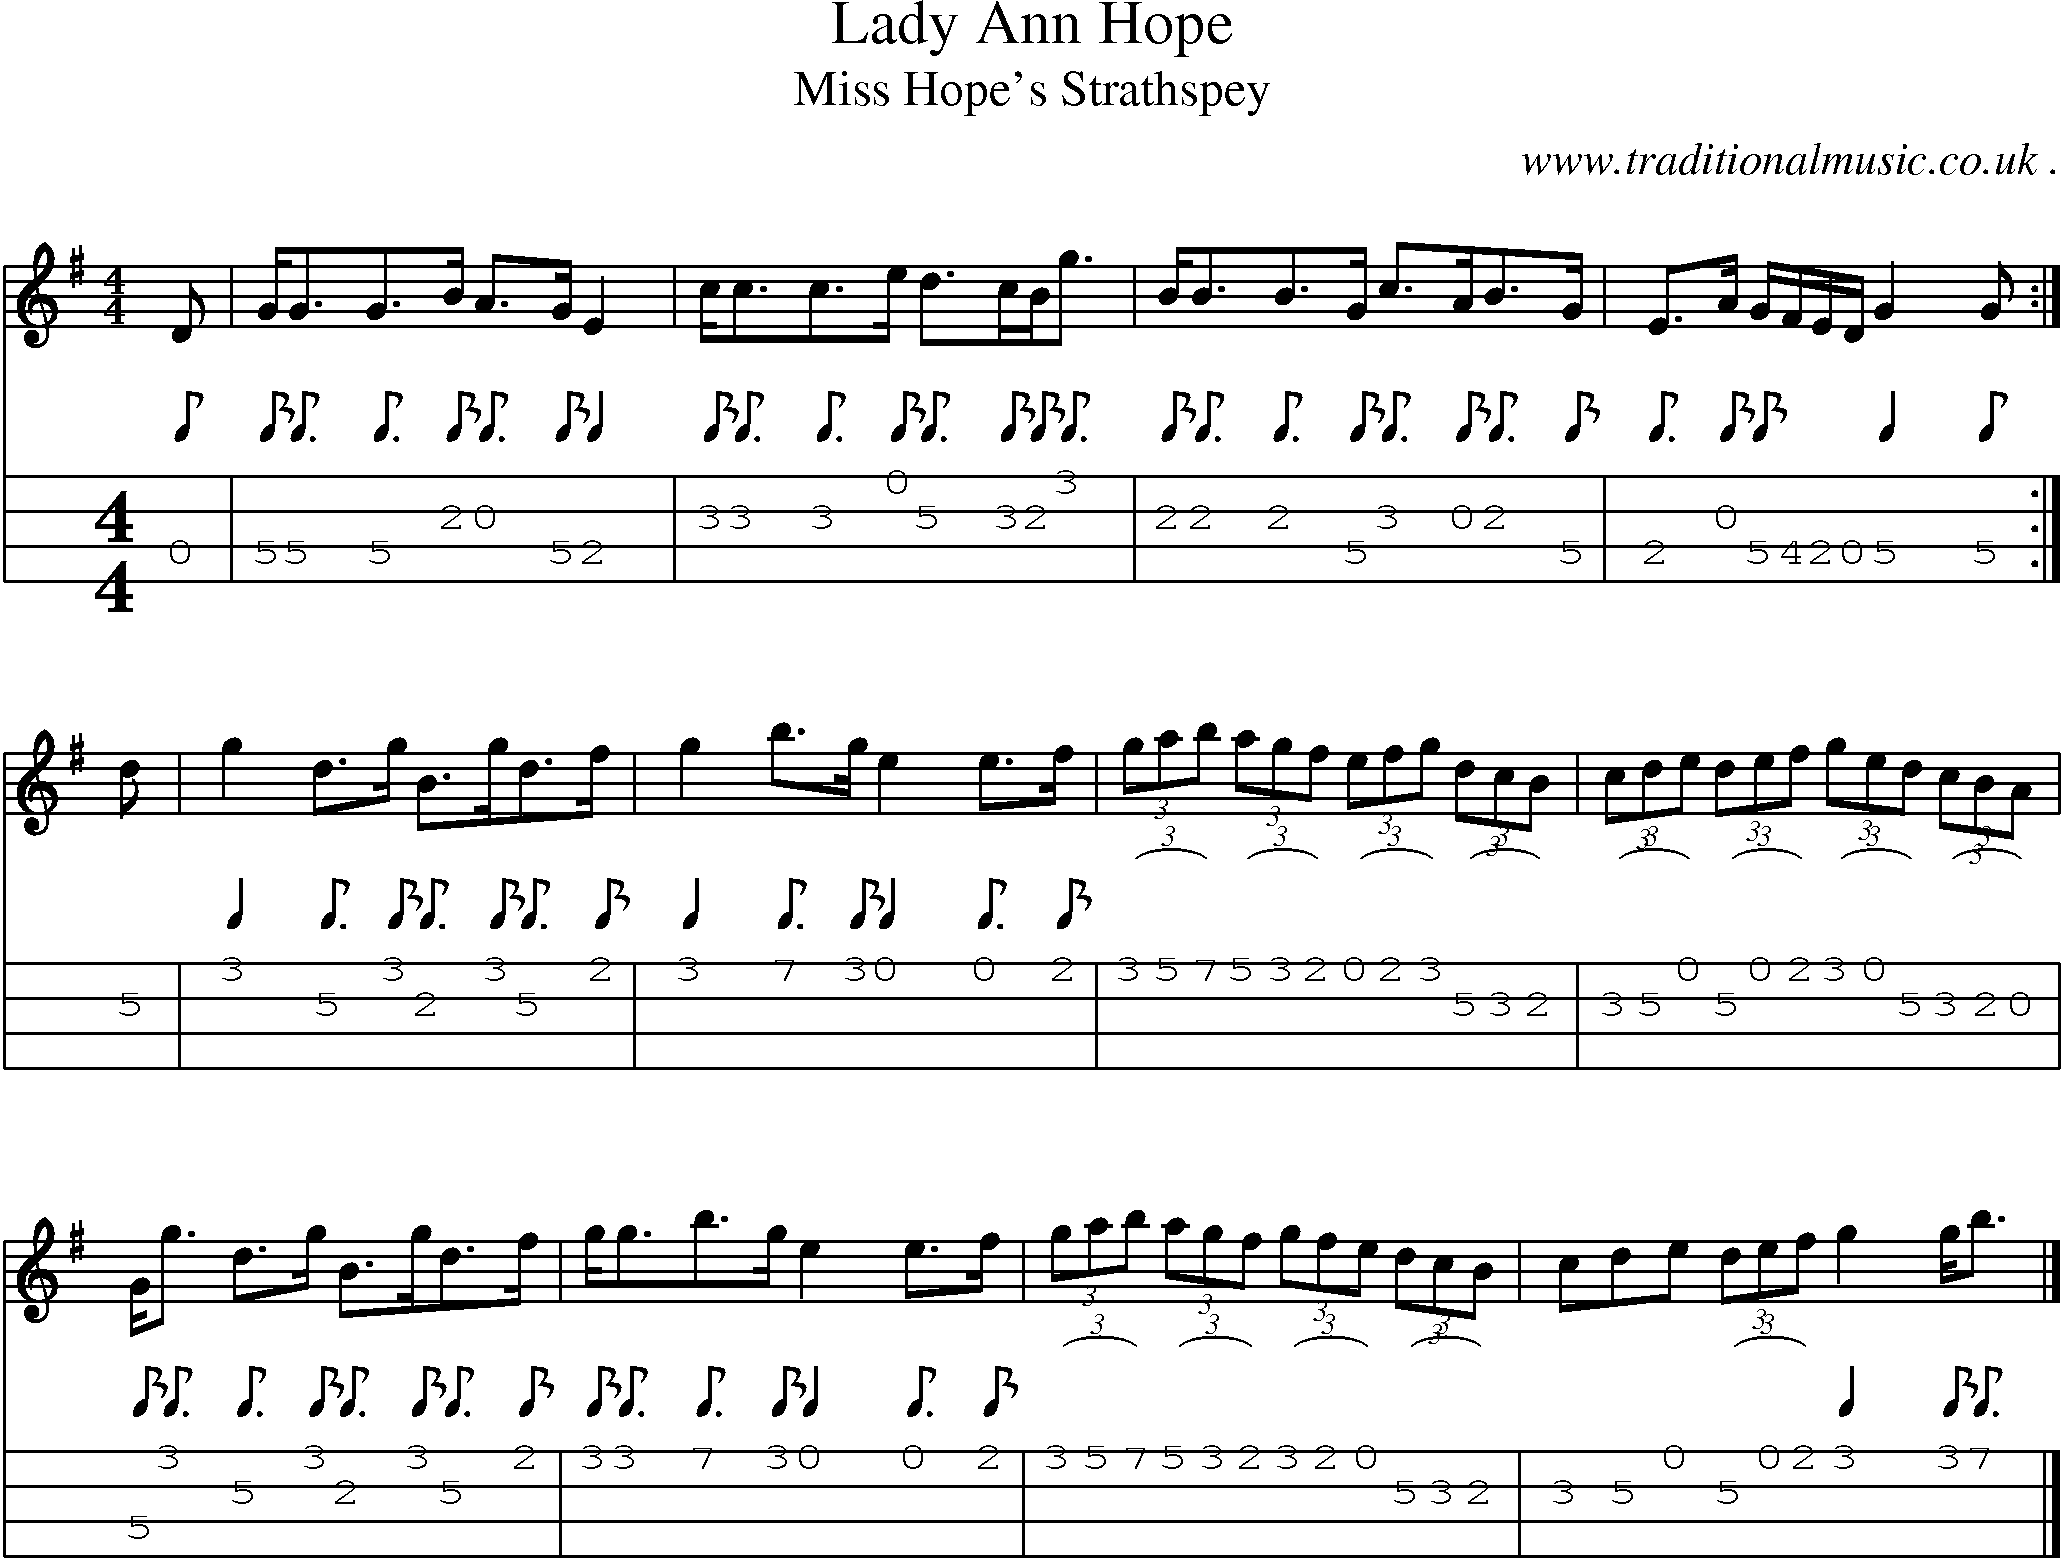 Sheet-music  score, Chords and Mandolin Tabs for Lady Ann Hope 